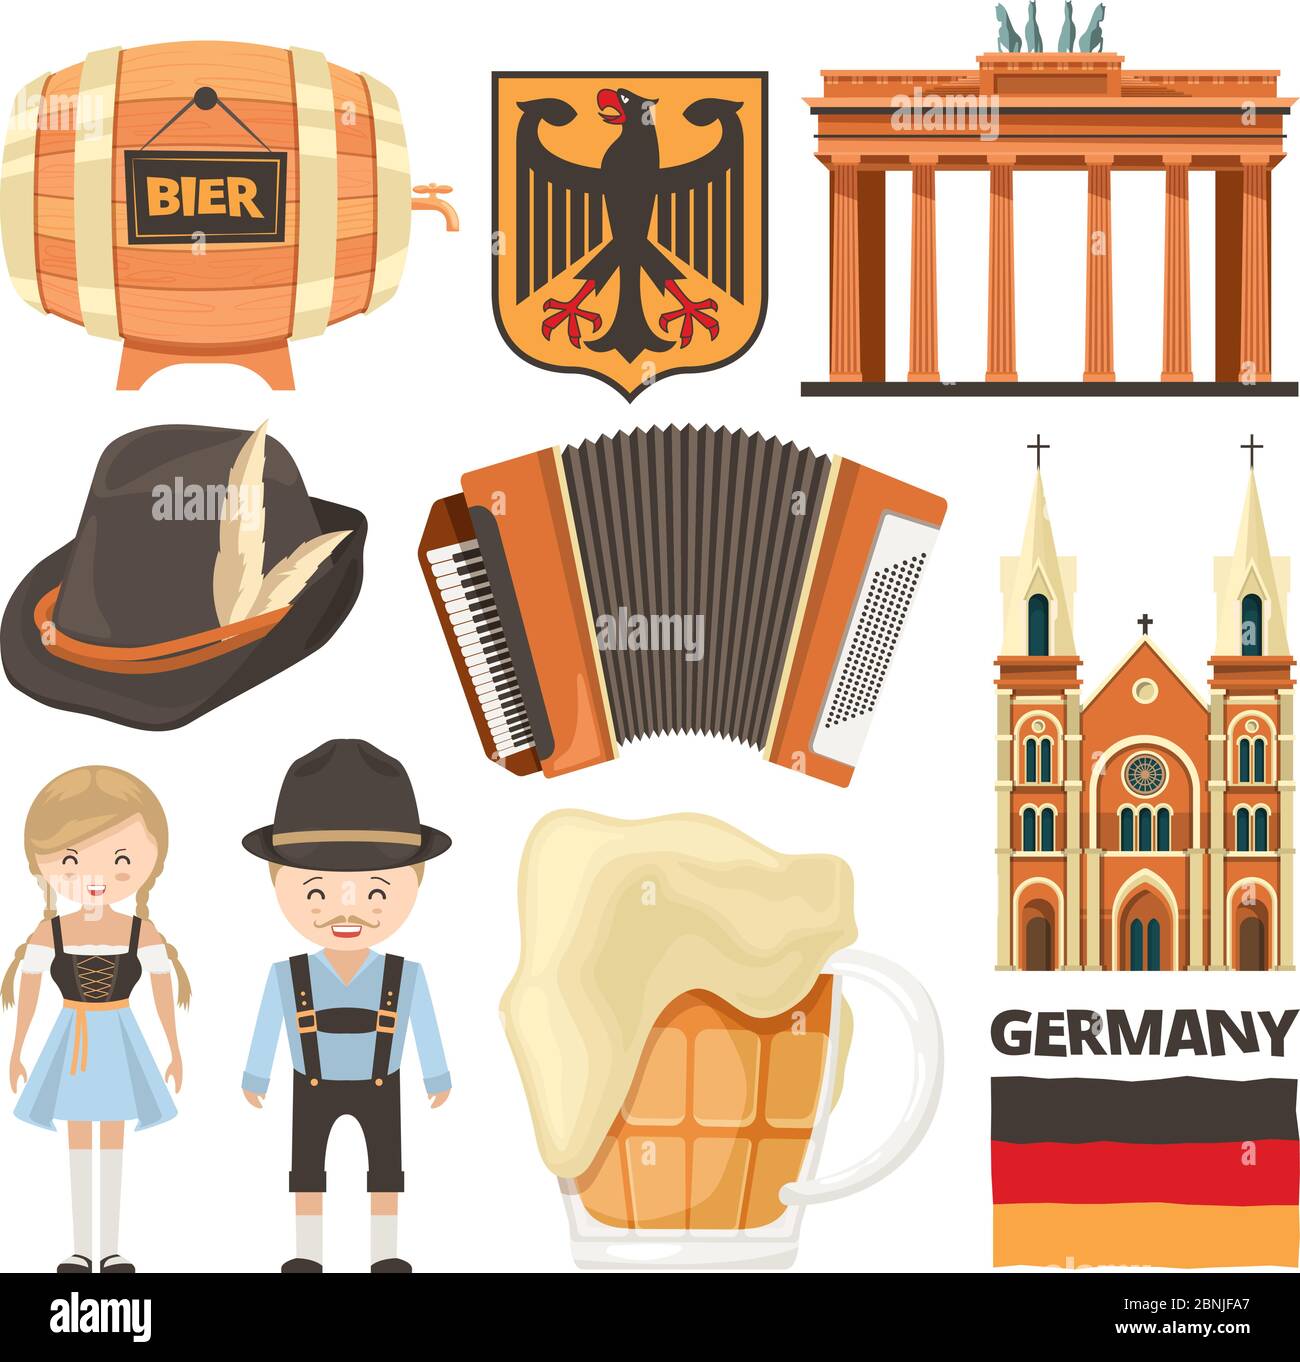 Illustrations of Germany landmarks and cultural objects Stock Vector